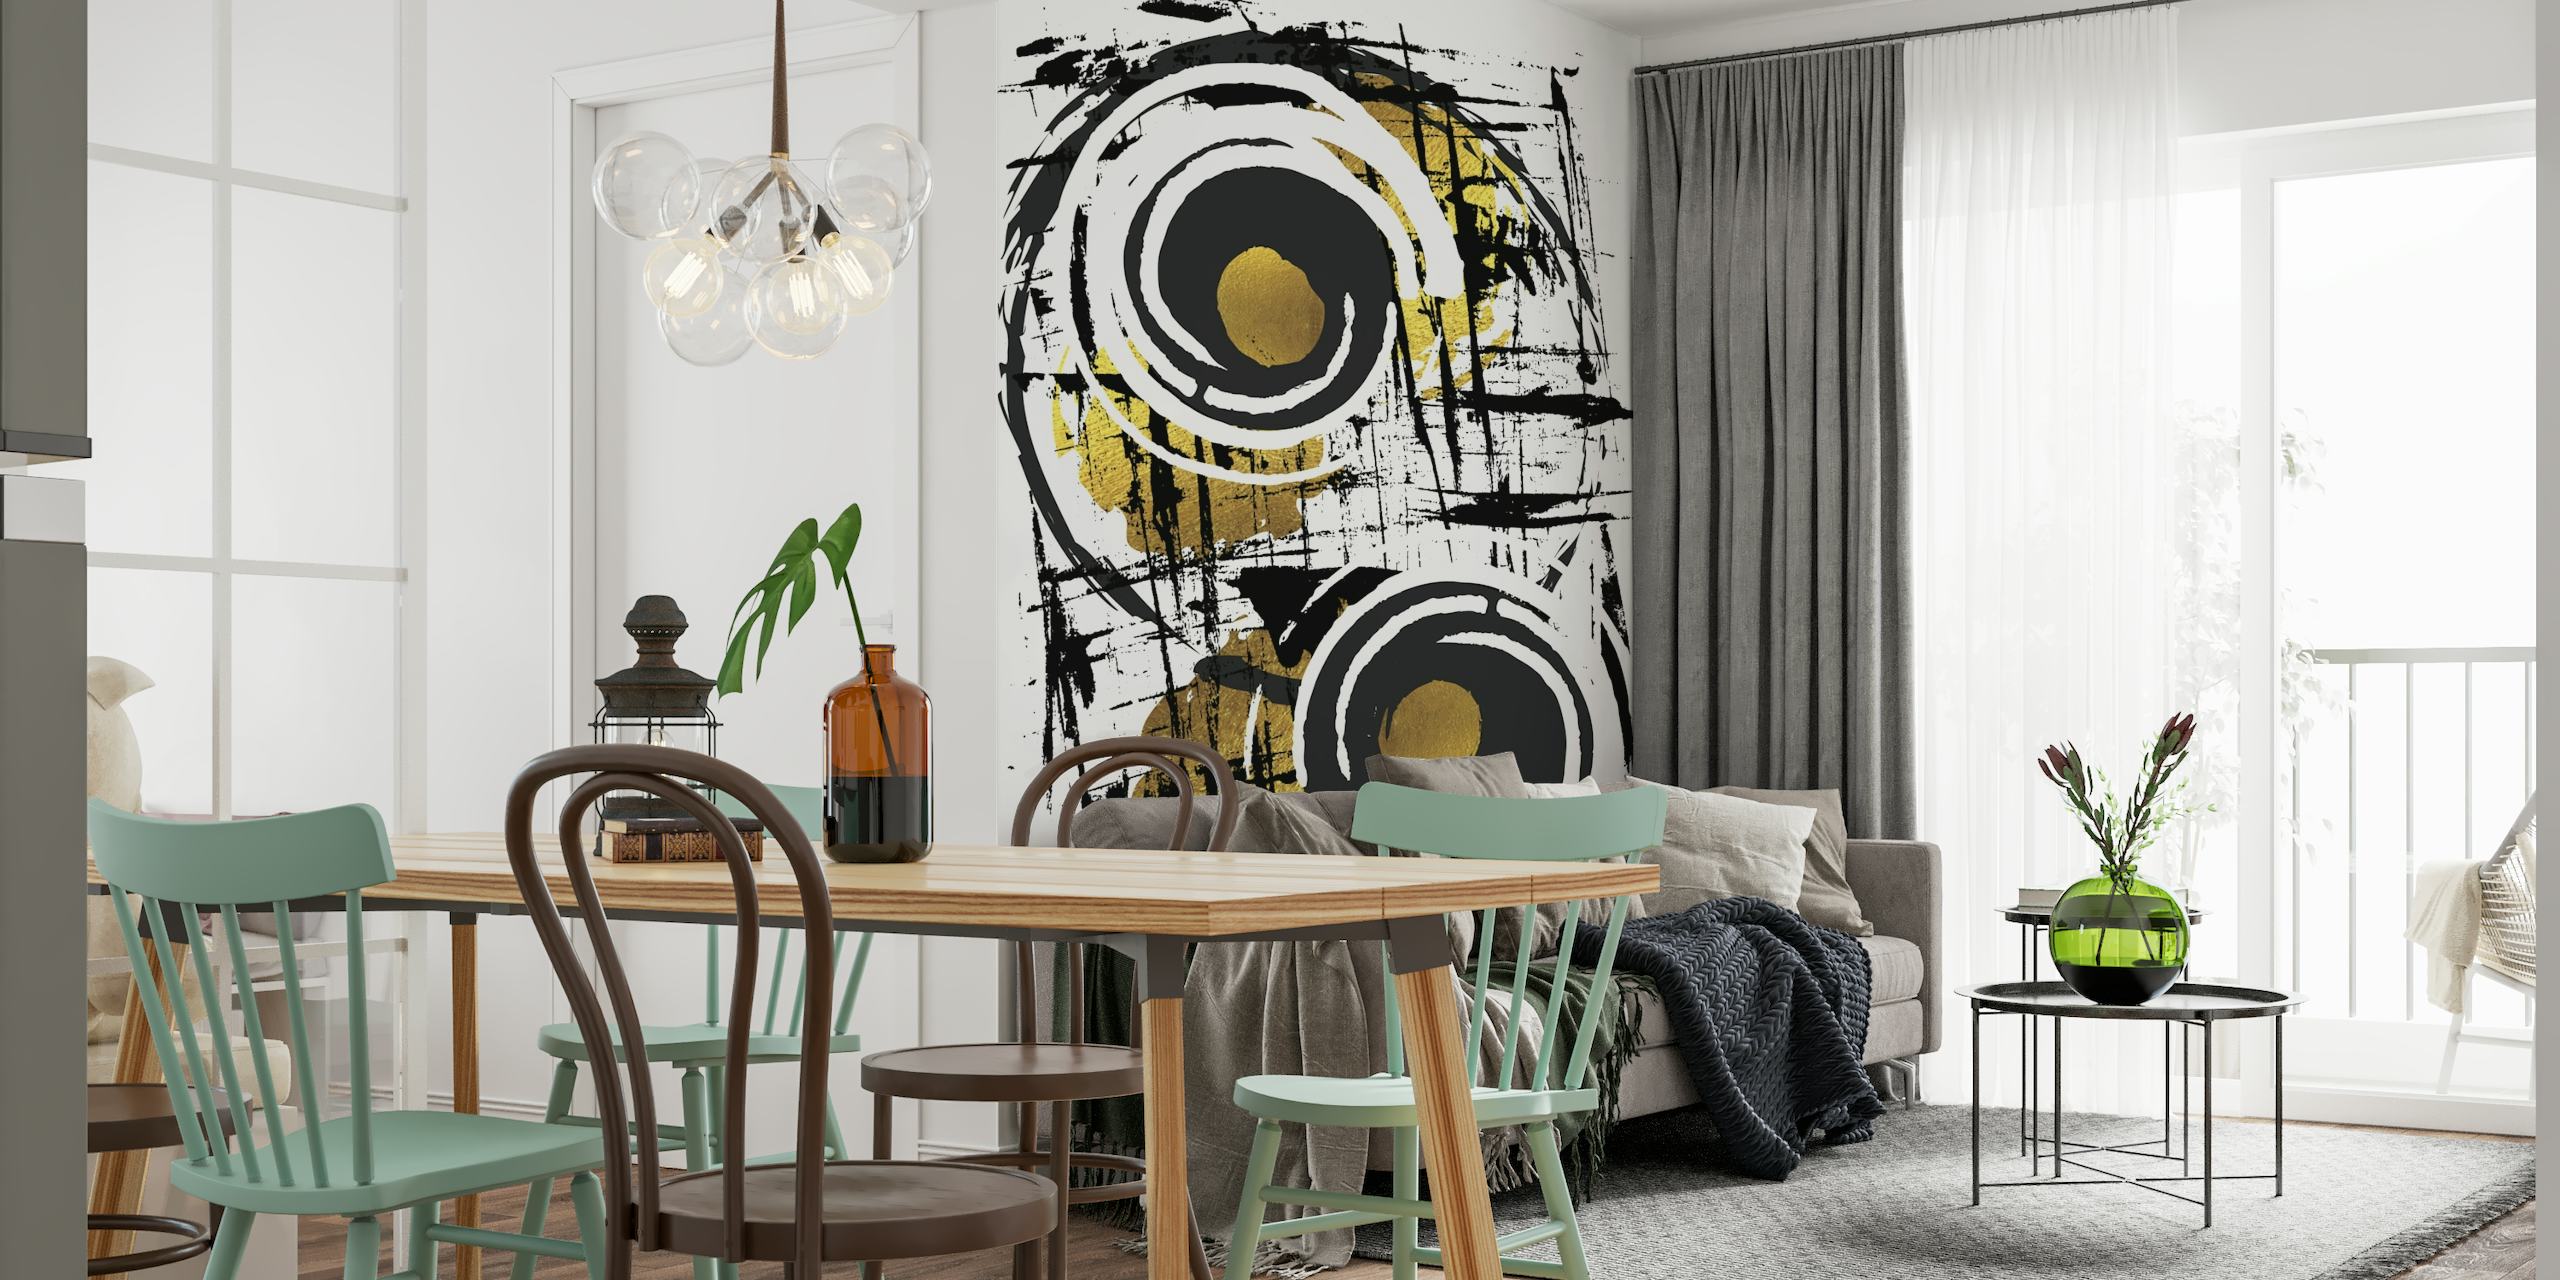 ABSTRACT ART Hypnotizing wall mural featuring black brushstrokes and golden circles on a white background